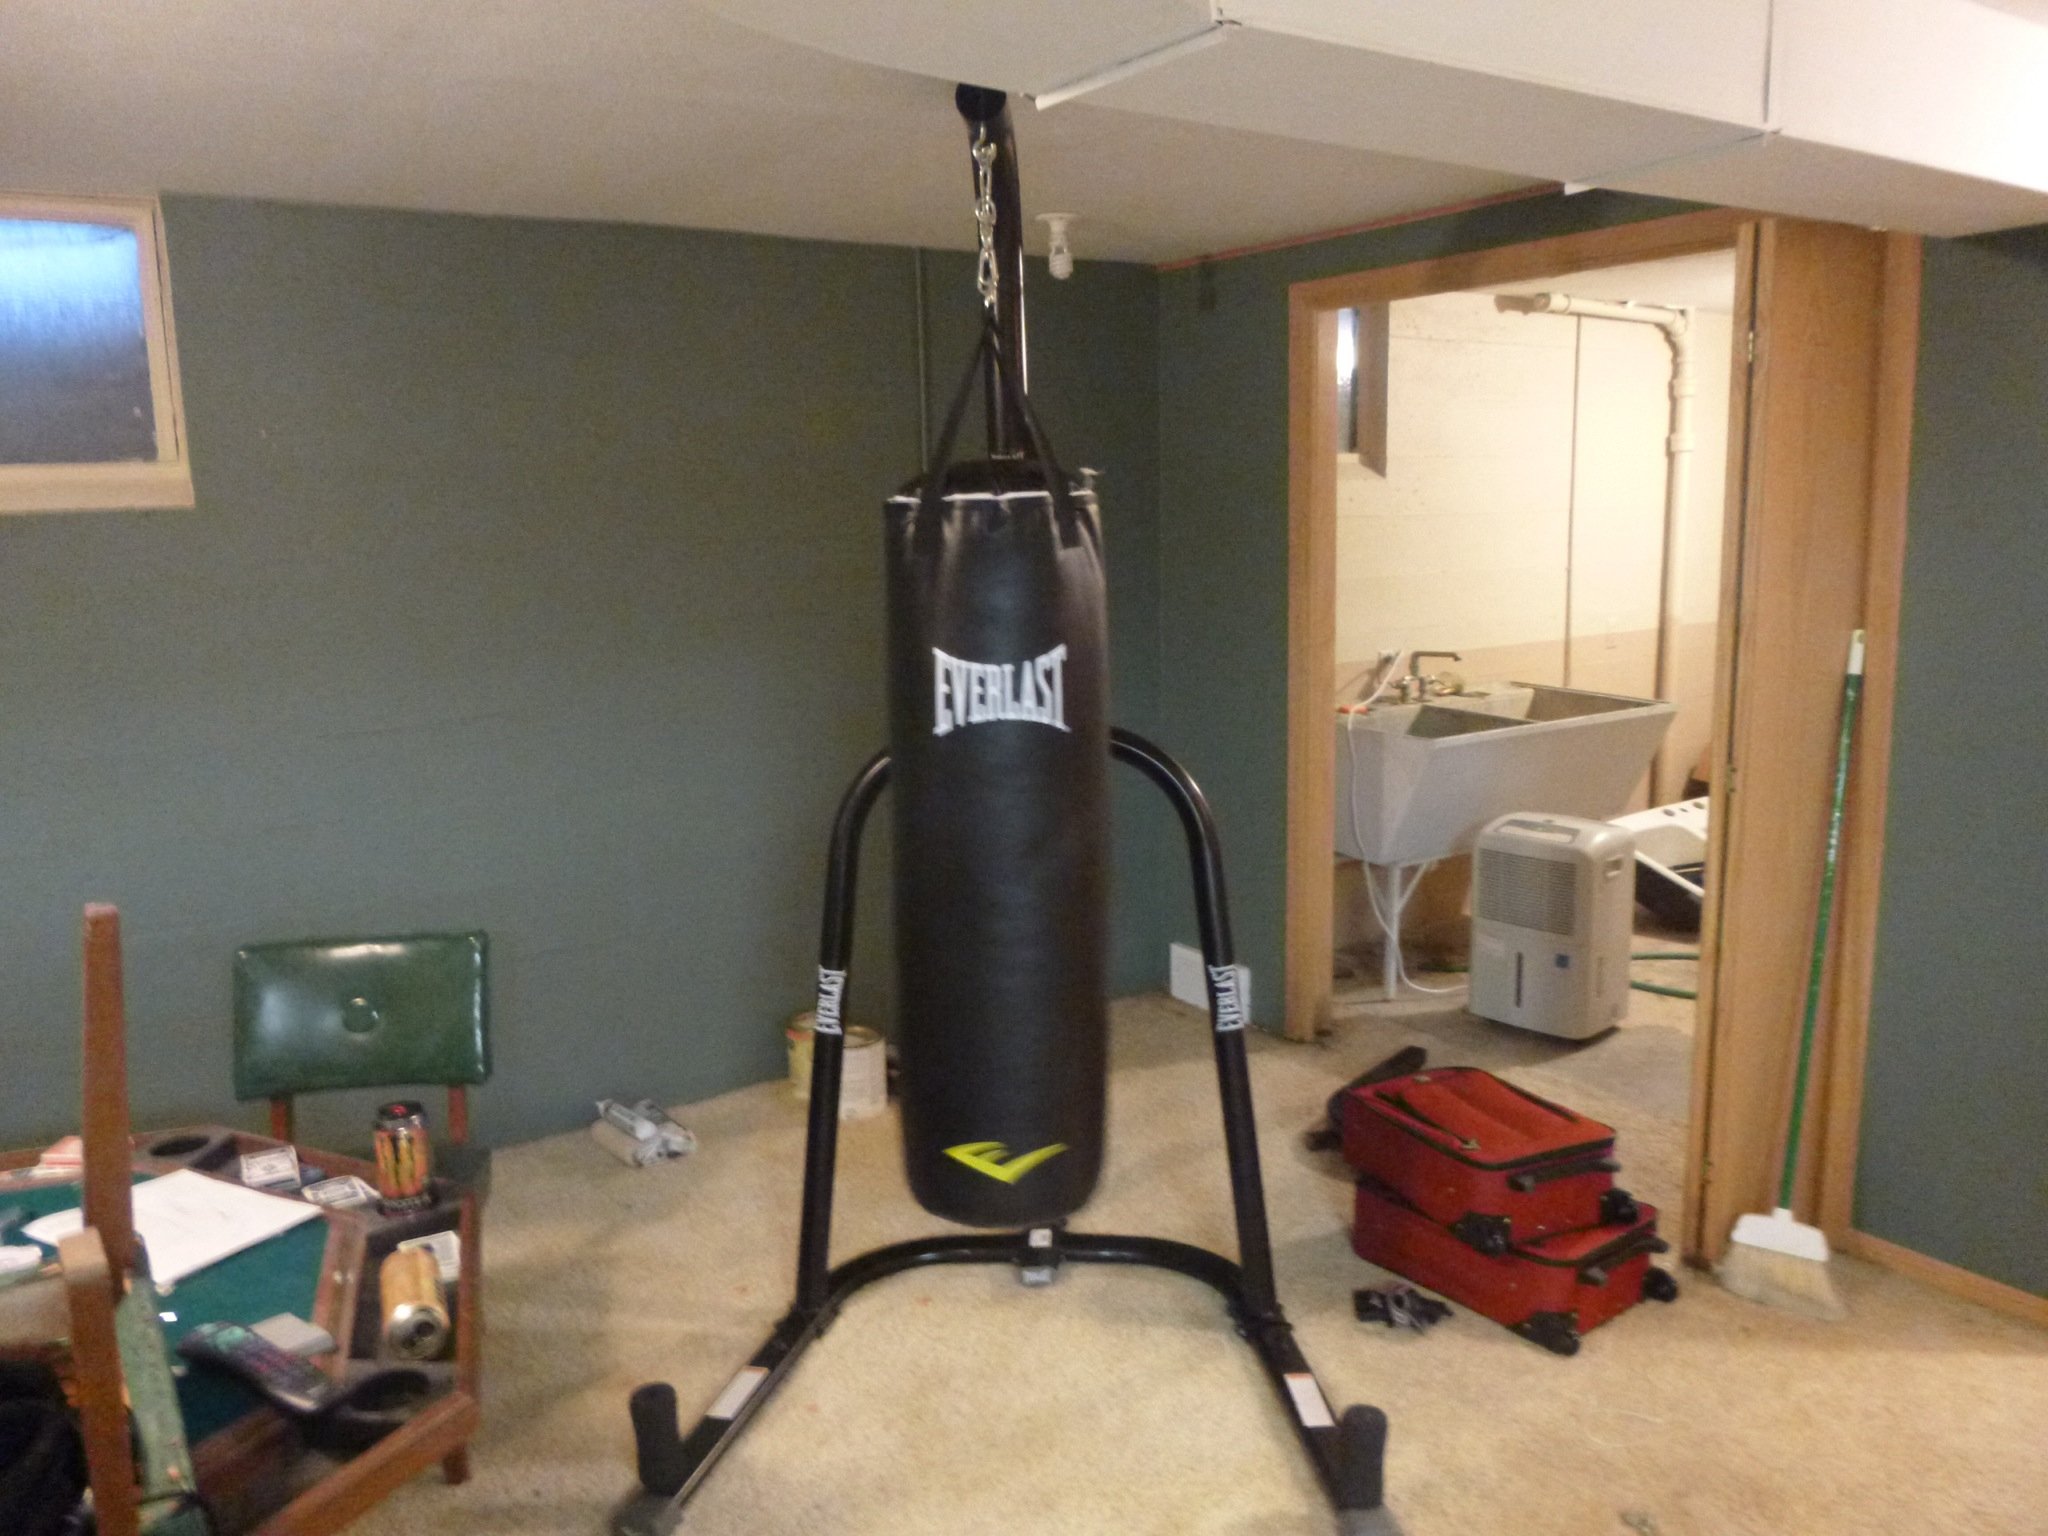 How to together a punching bag set. (everlast) B+C